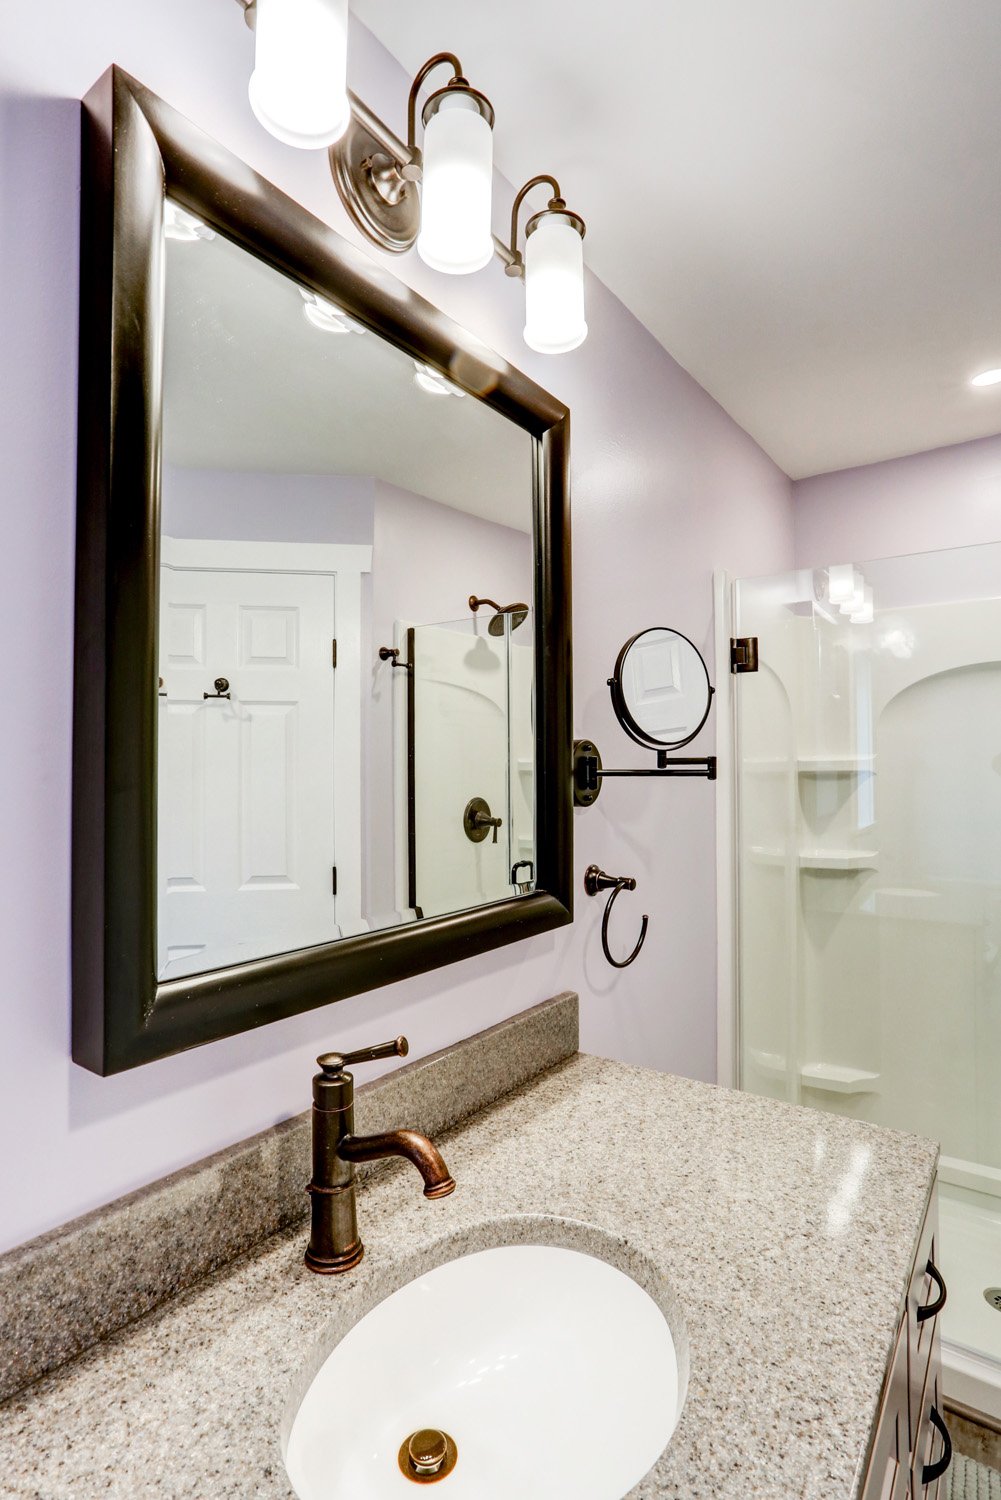 Oil Rubbed Bronze Hardware and Marble countertop in Millersville bathroom remodel